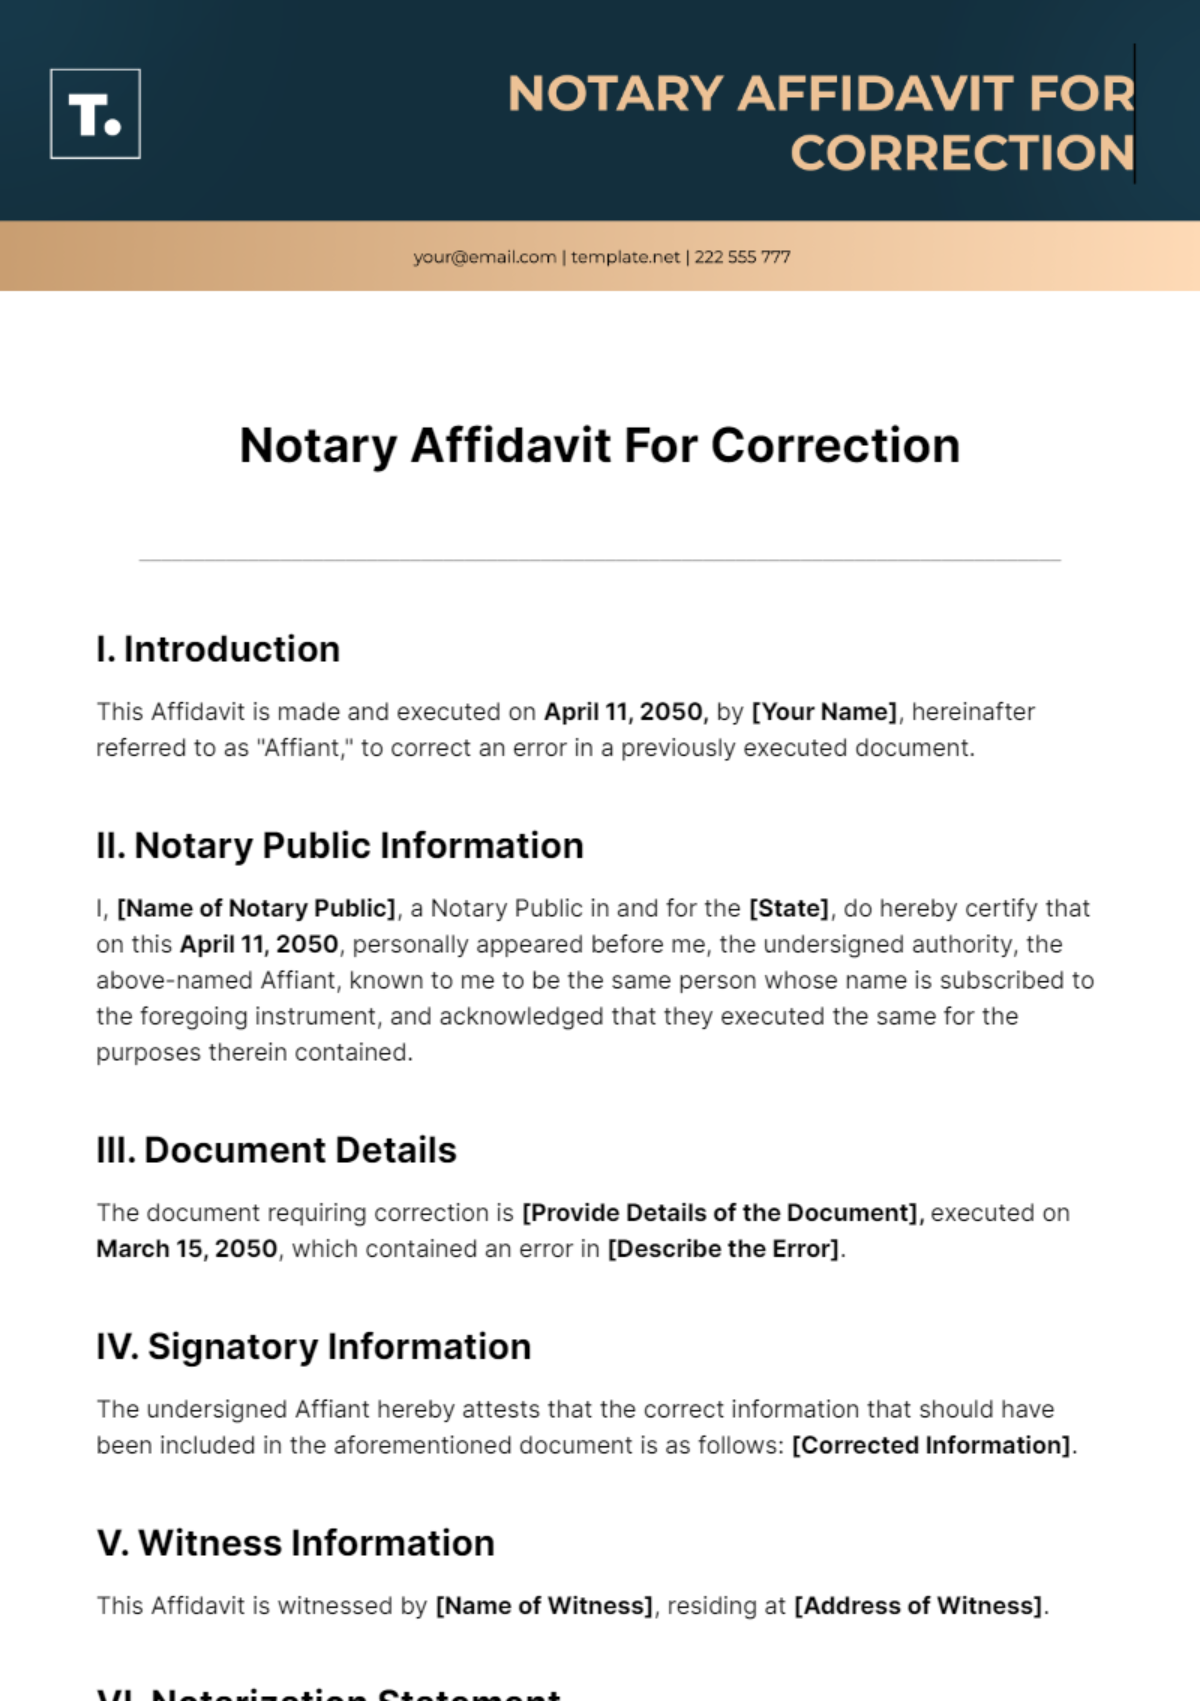 Notary Affidavit For Correction Template